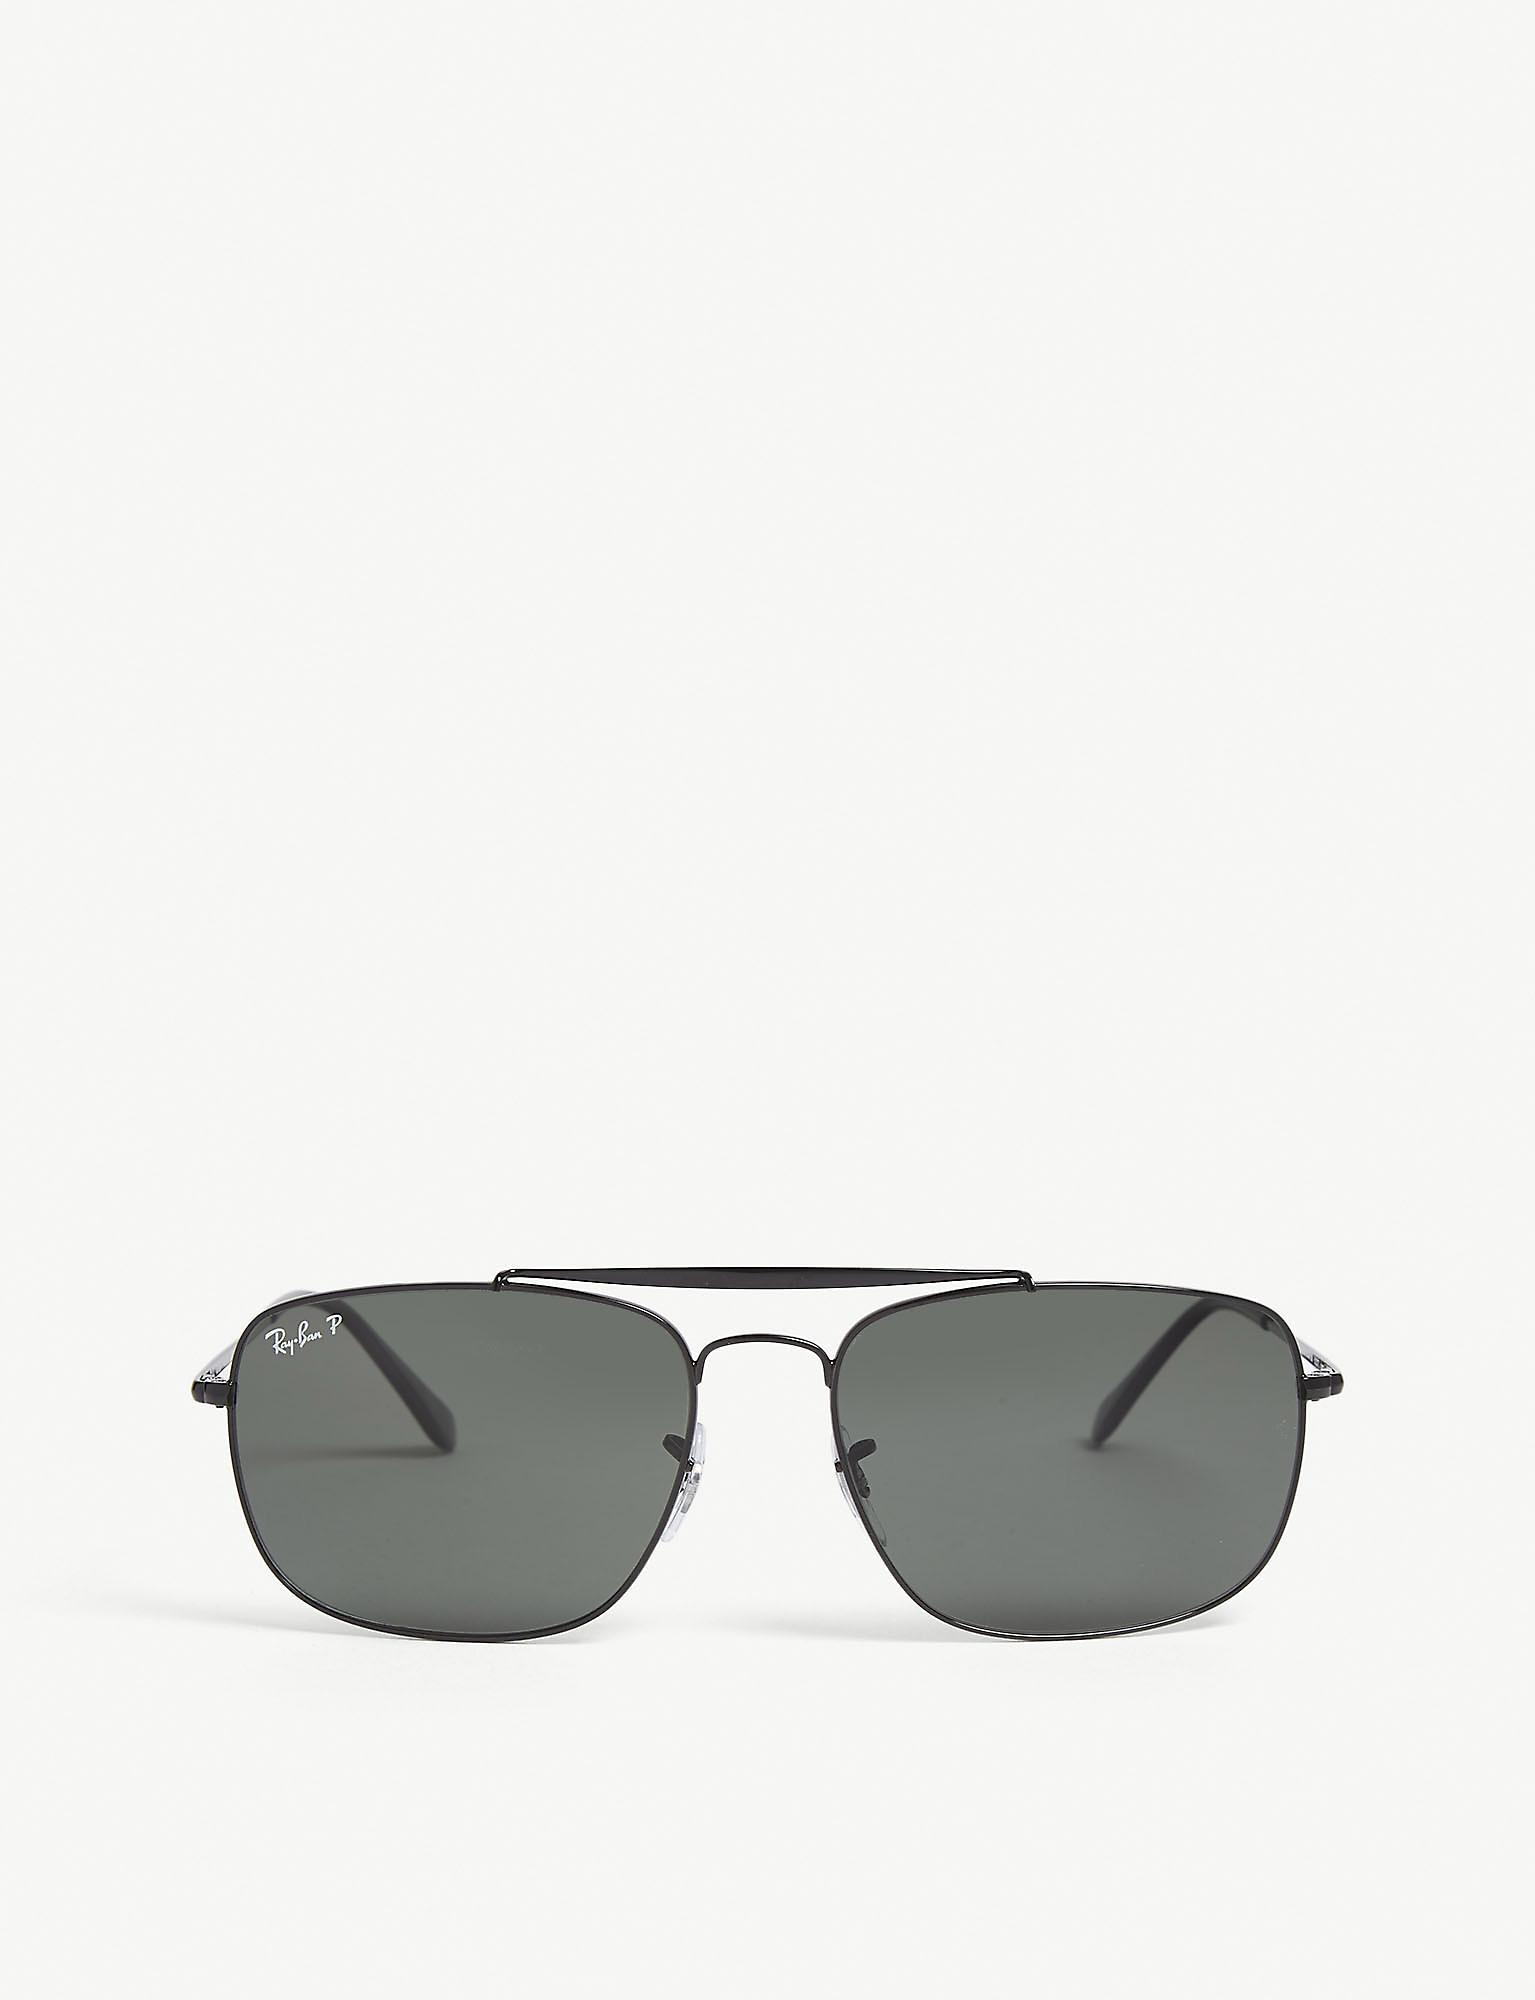 Ray-Ban Square-frame Sunglasses in Black for Men - Lyst